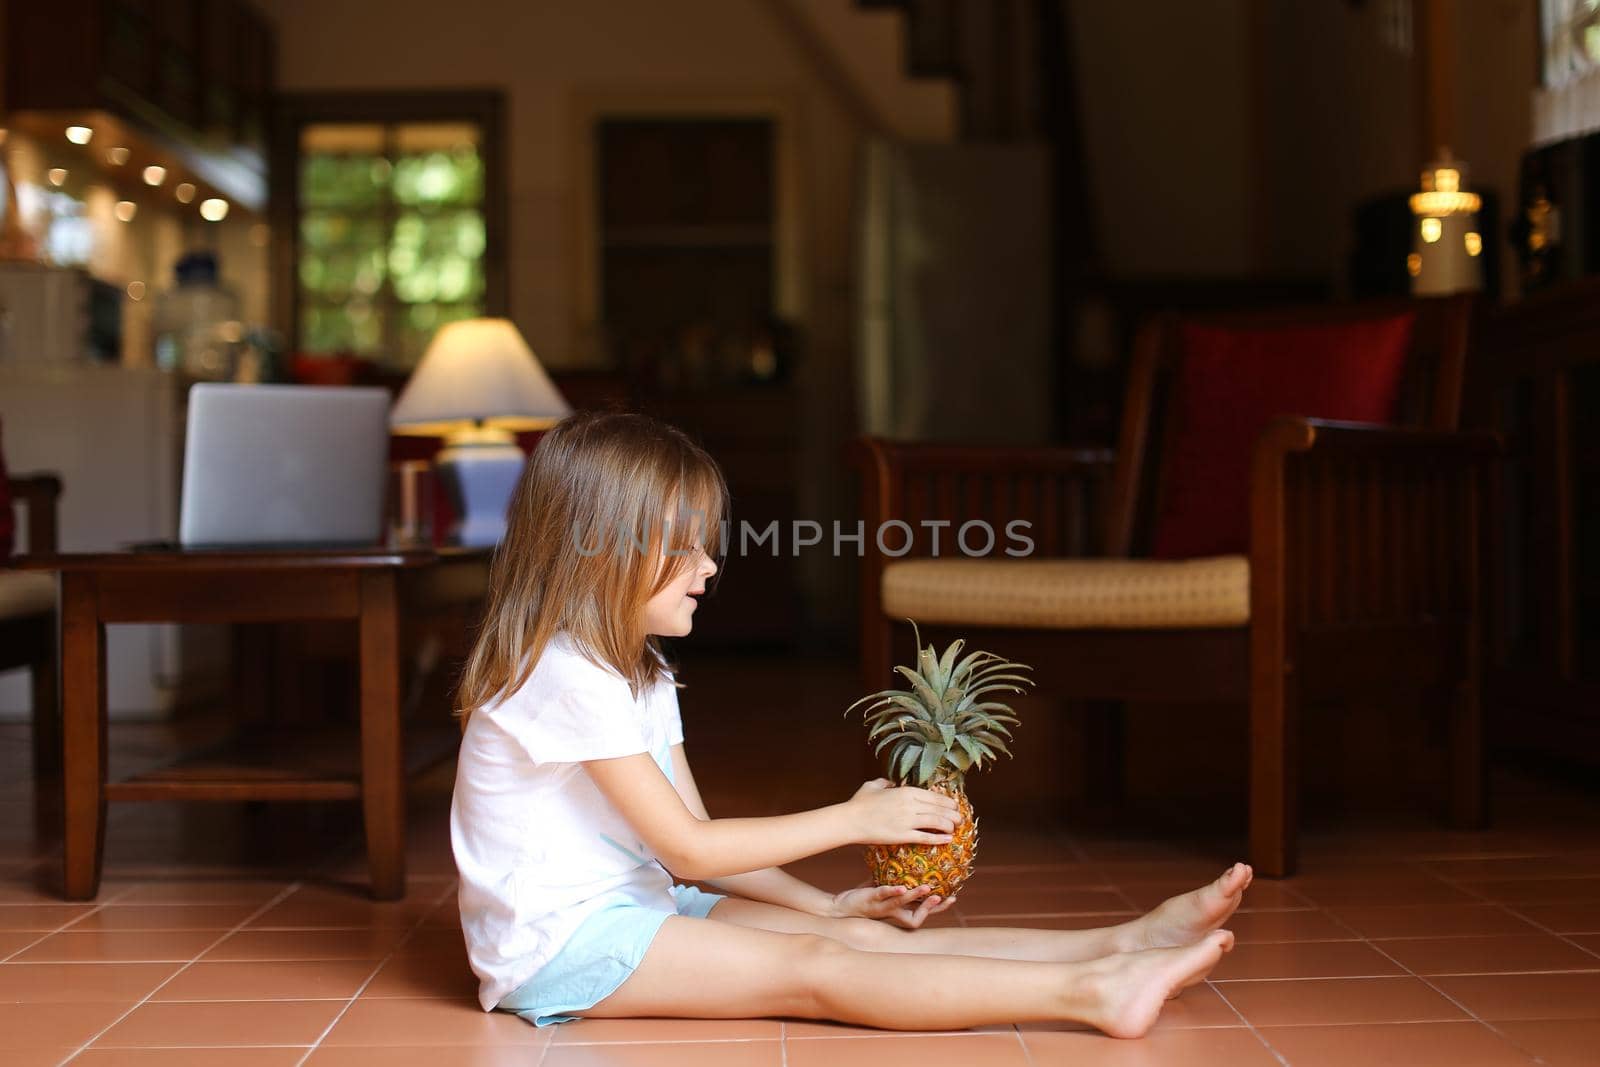 Little female kid sitting on floor in living room and playing with pineapple, laptop in background. Concept of health life, fruit and childhood.